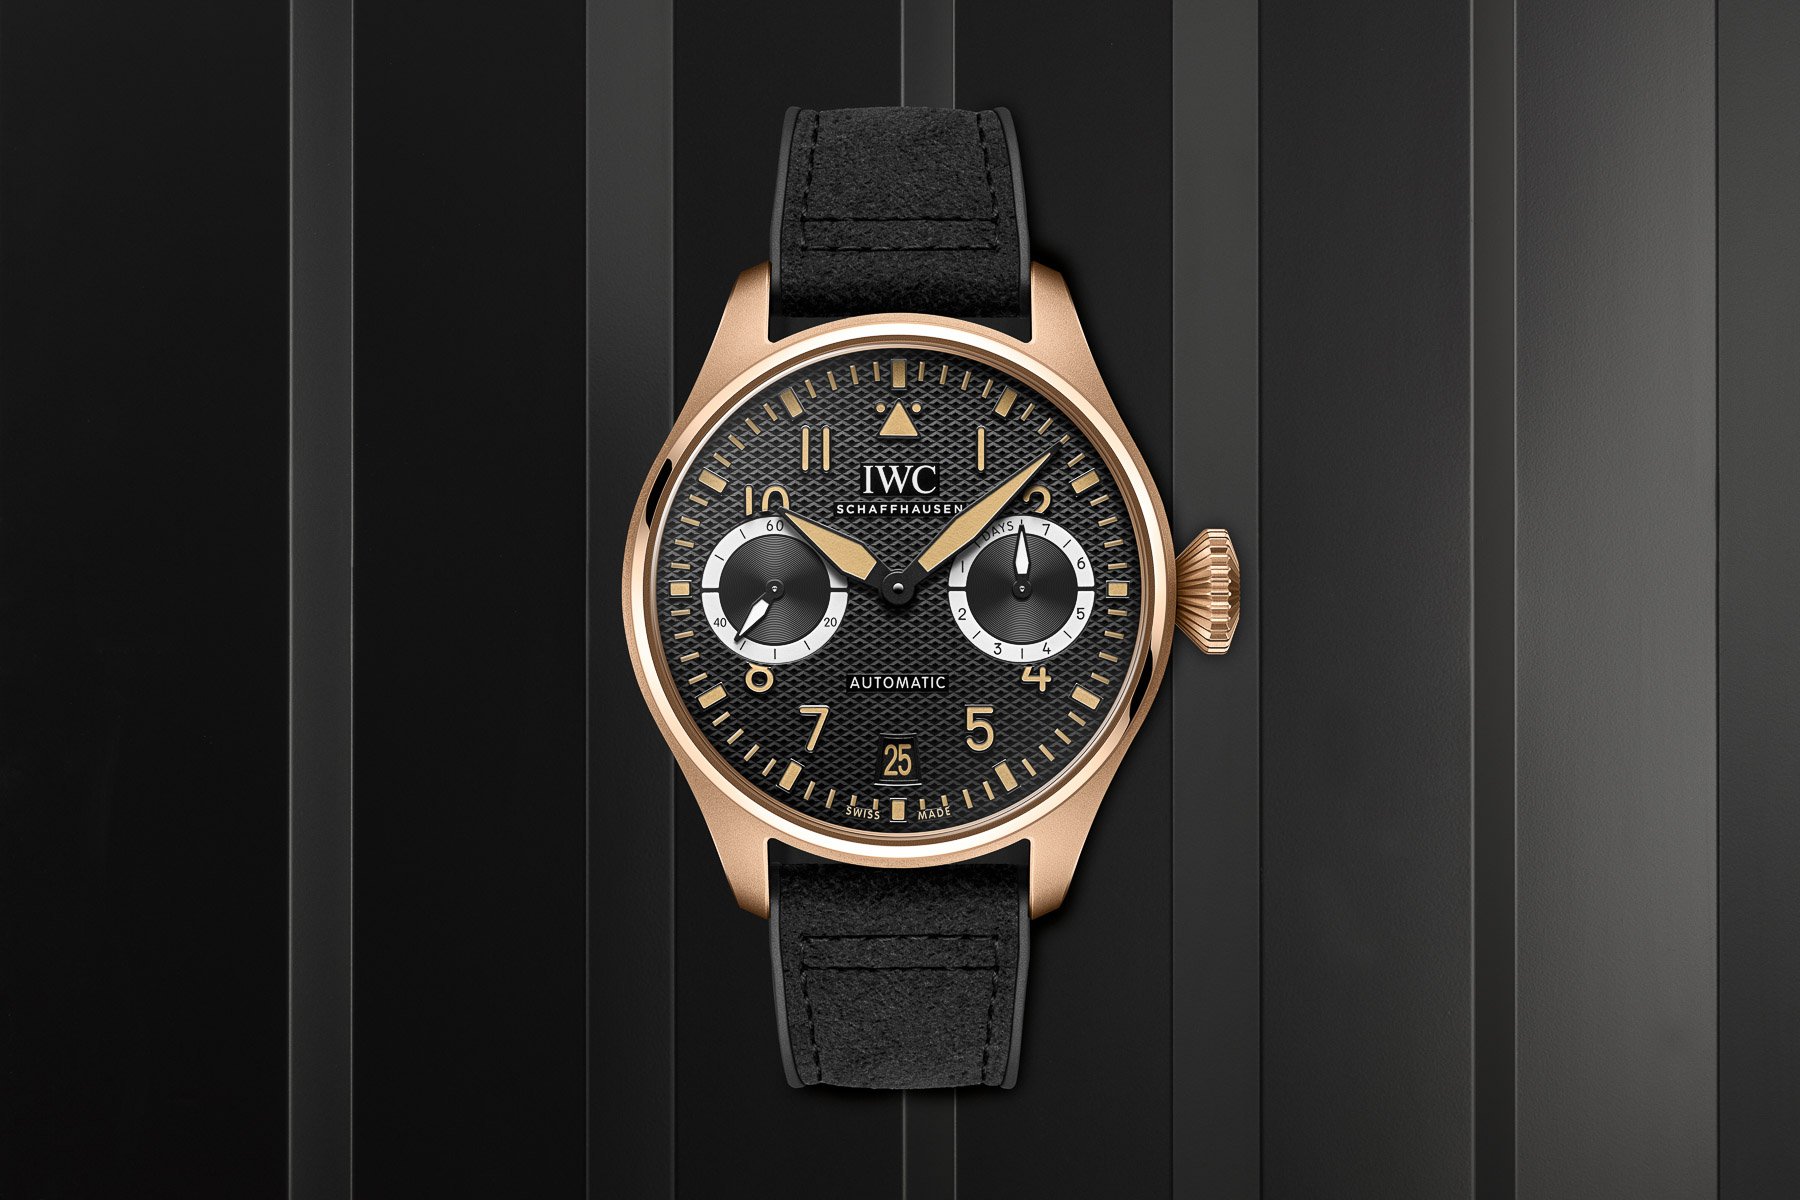 The New IWC Big Pilot’s Watch AMG G 63 ? How Come I Love The Car But Not This Watch"